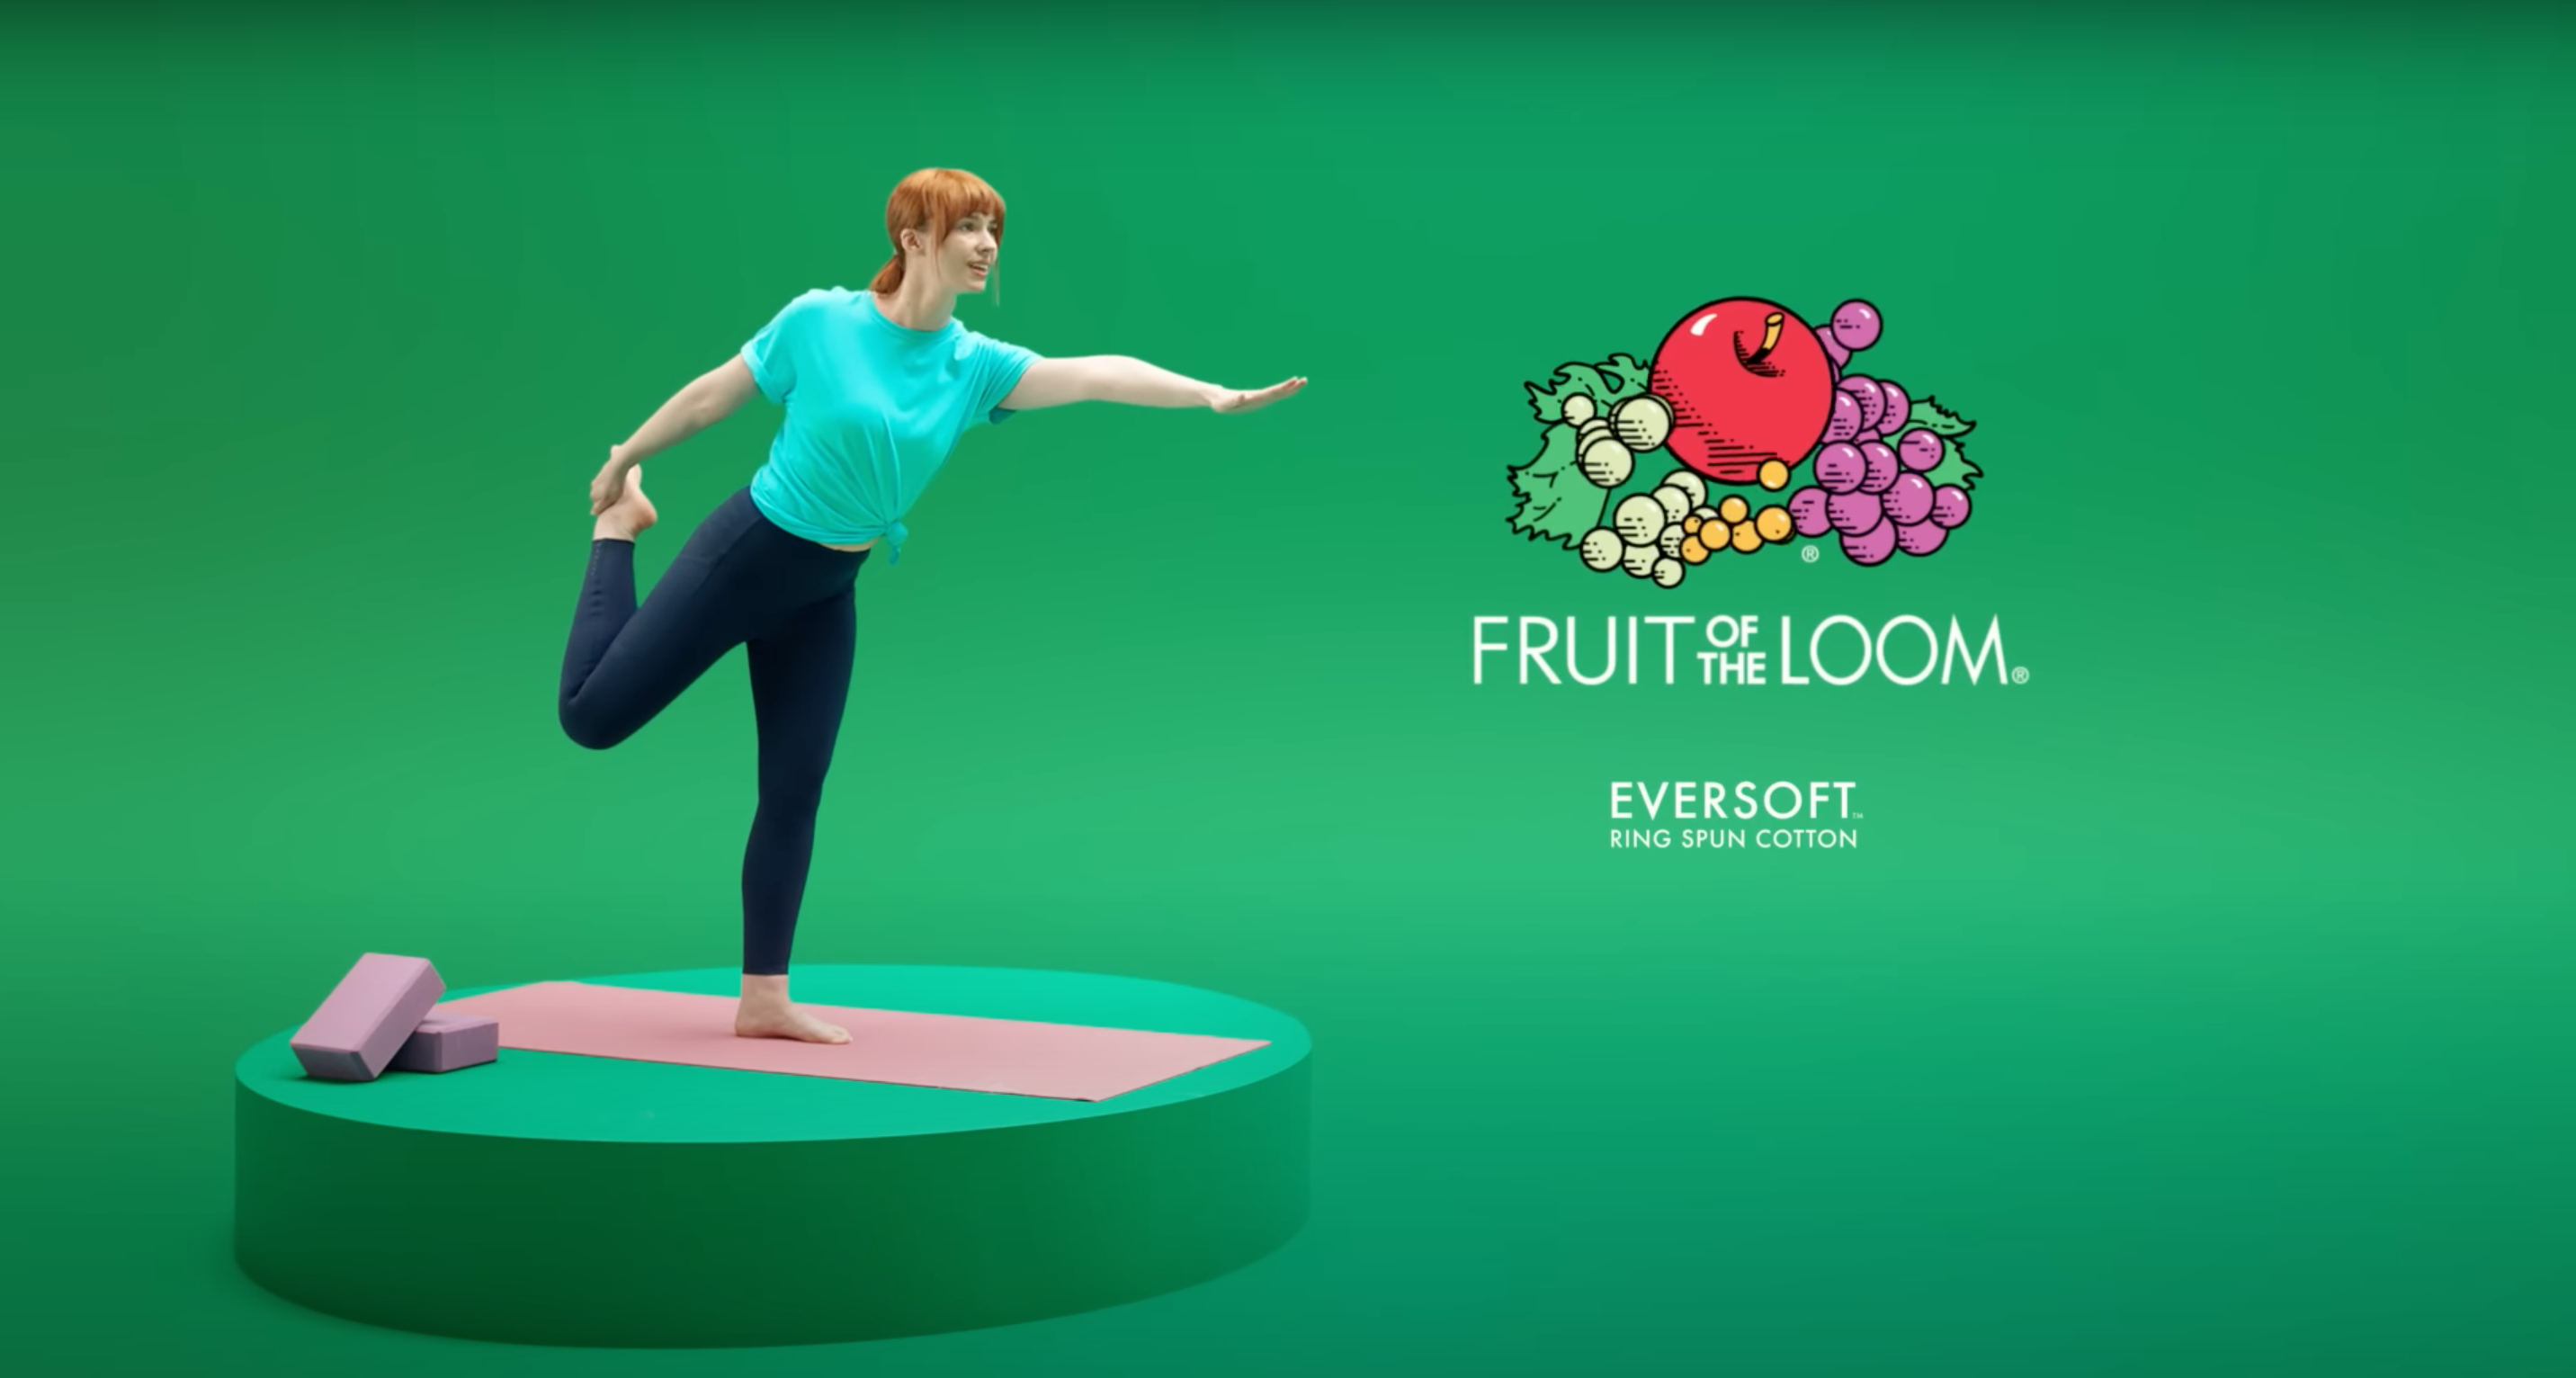 Fruit of the Loom Fit For Me Campaign - kushbook